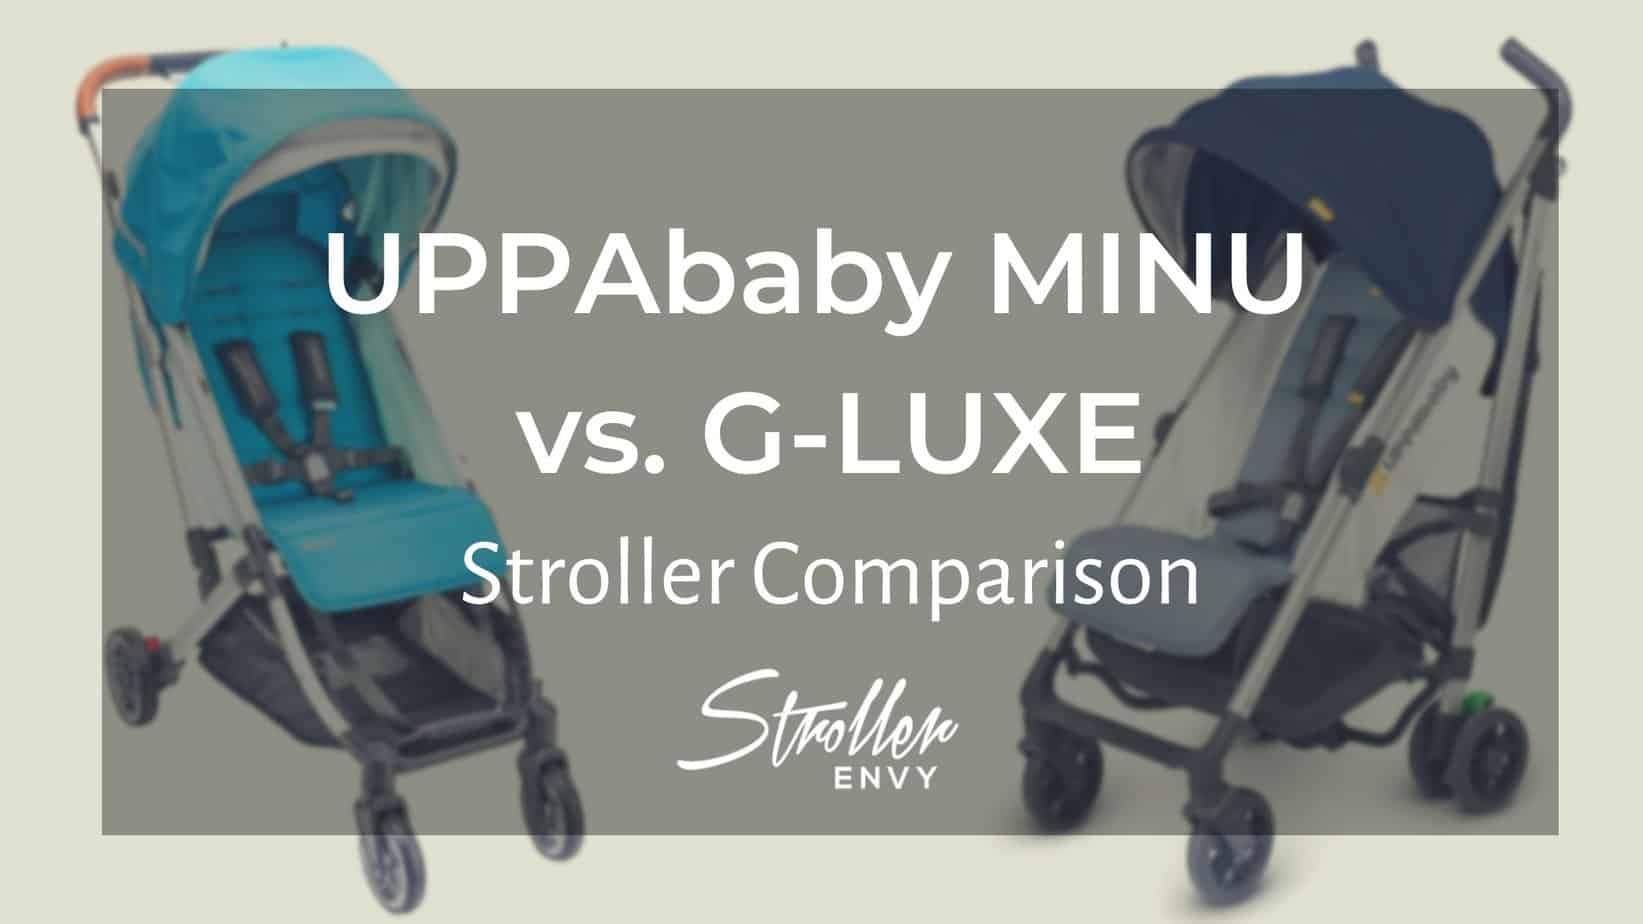 UPPAbaby MINU vs G-LUXE